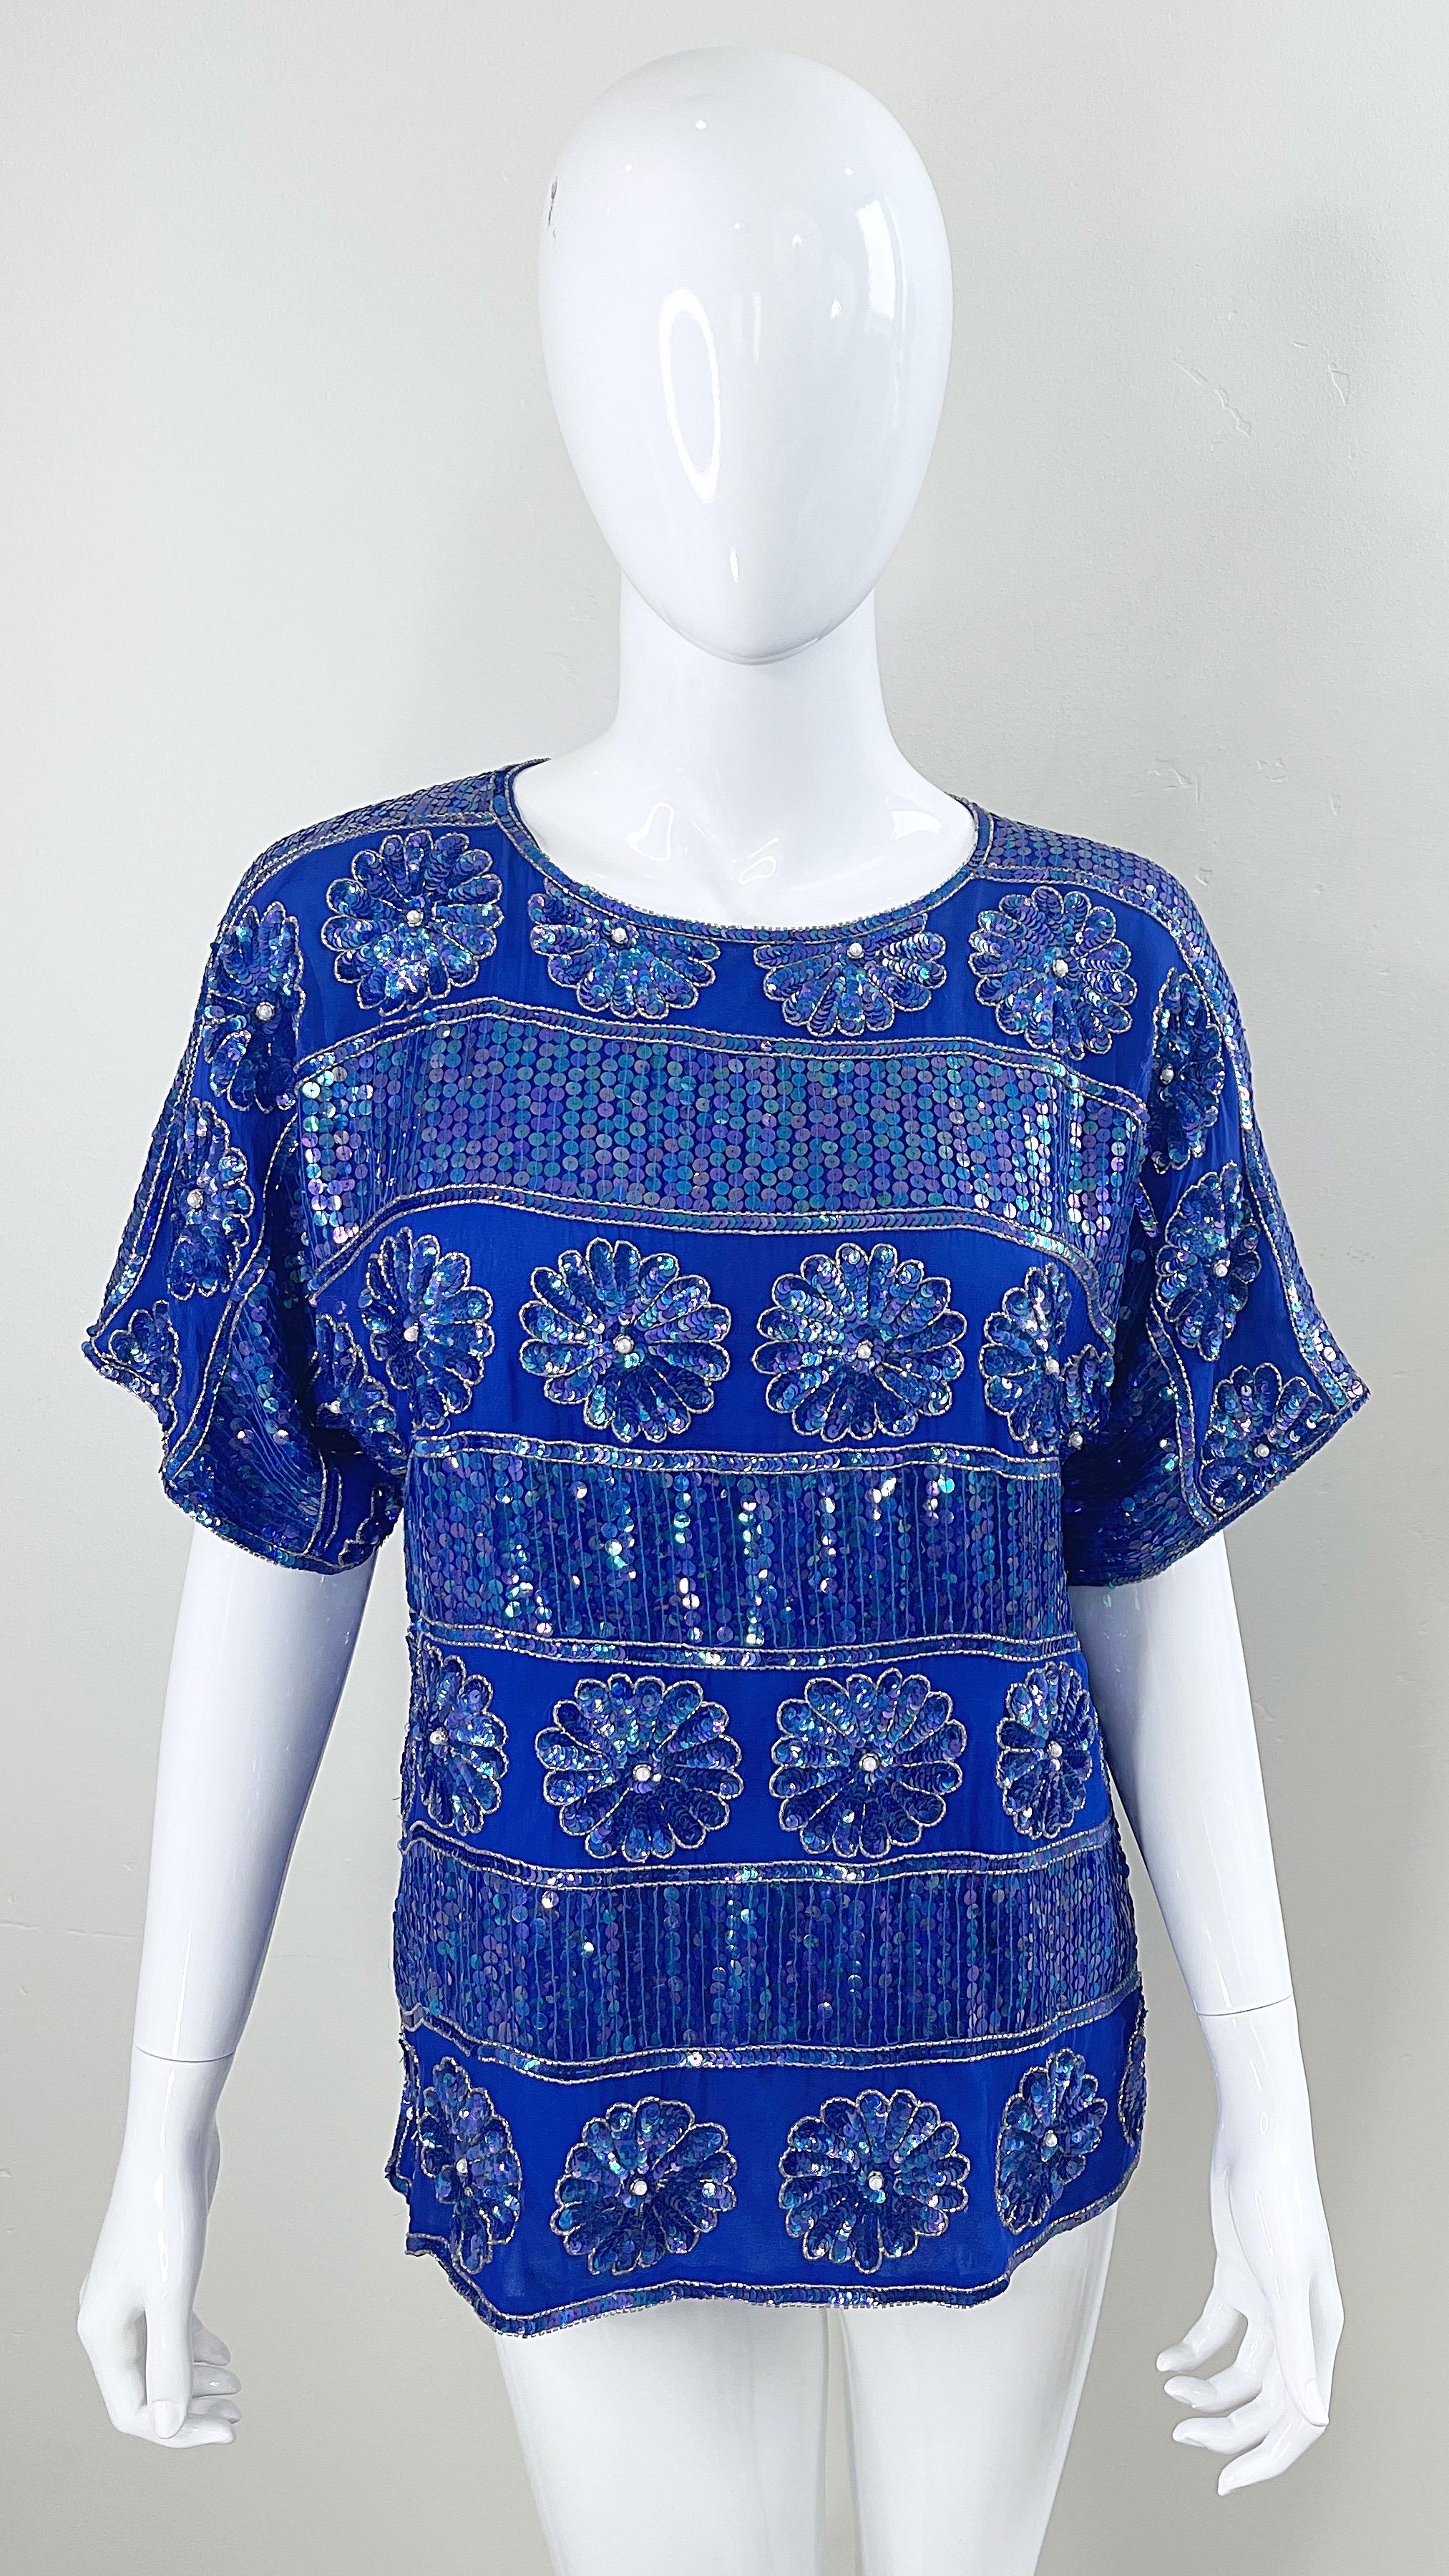 Amazing 1980s royal blue silk chiffon short sleeve blouse ! Features thousands of hand-sewn sequins, beads and pearls throughout. Sequins sewn to look like flowers. Hook-and-eye closure at top back center neck. The perfect top for any occasion !
In